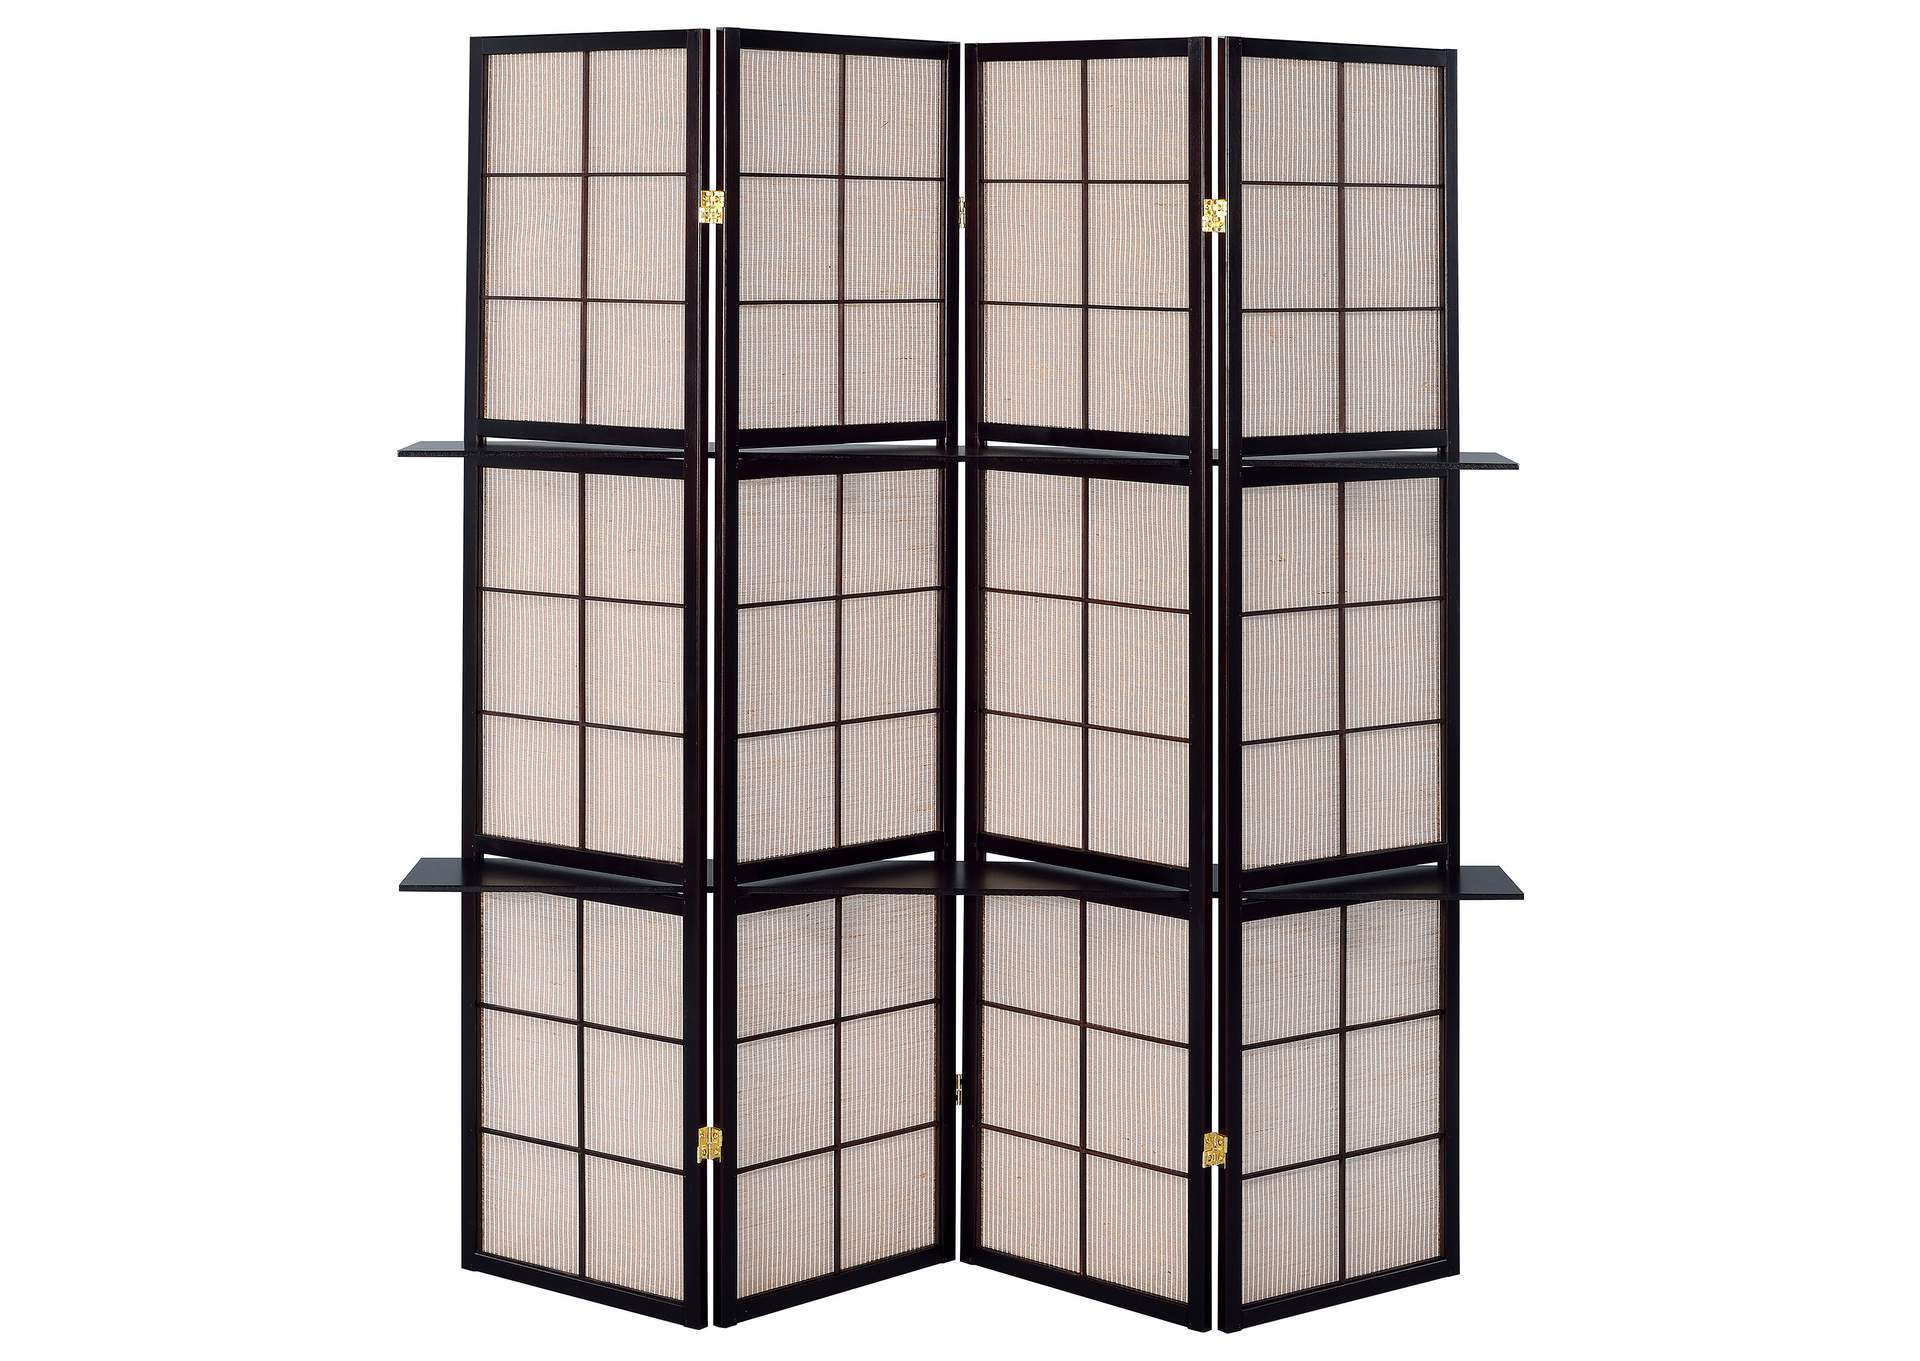 Iggy 4-panel Folding Screen with Removable Shelves Tan and Cappuccino,Coaster Furniture